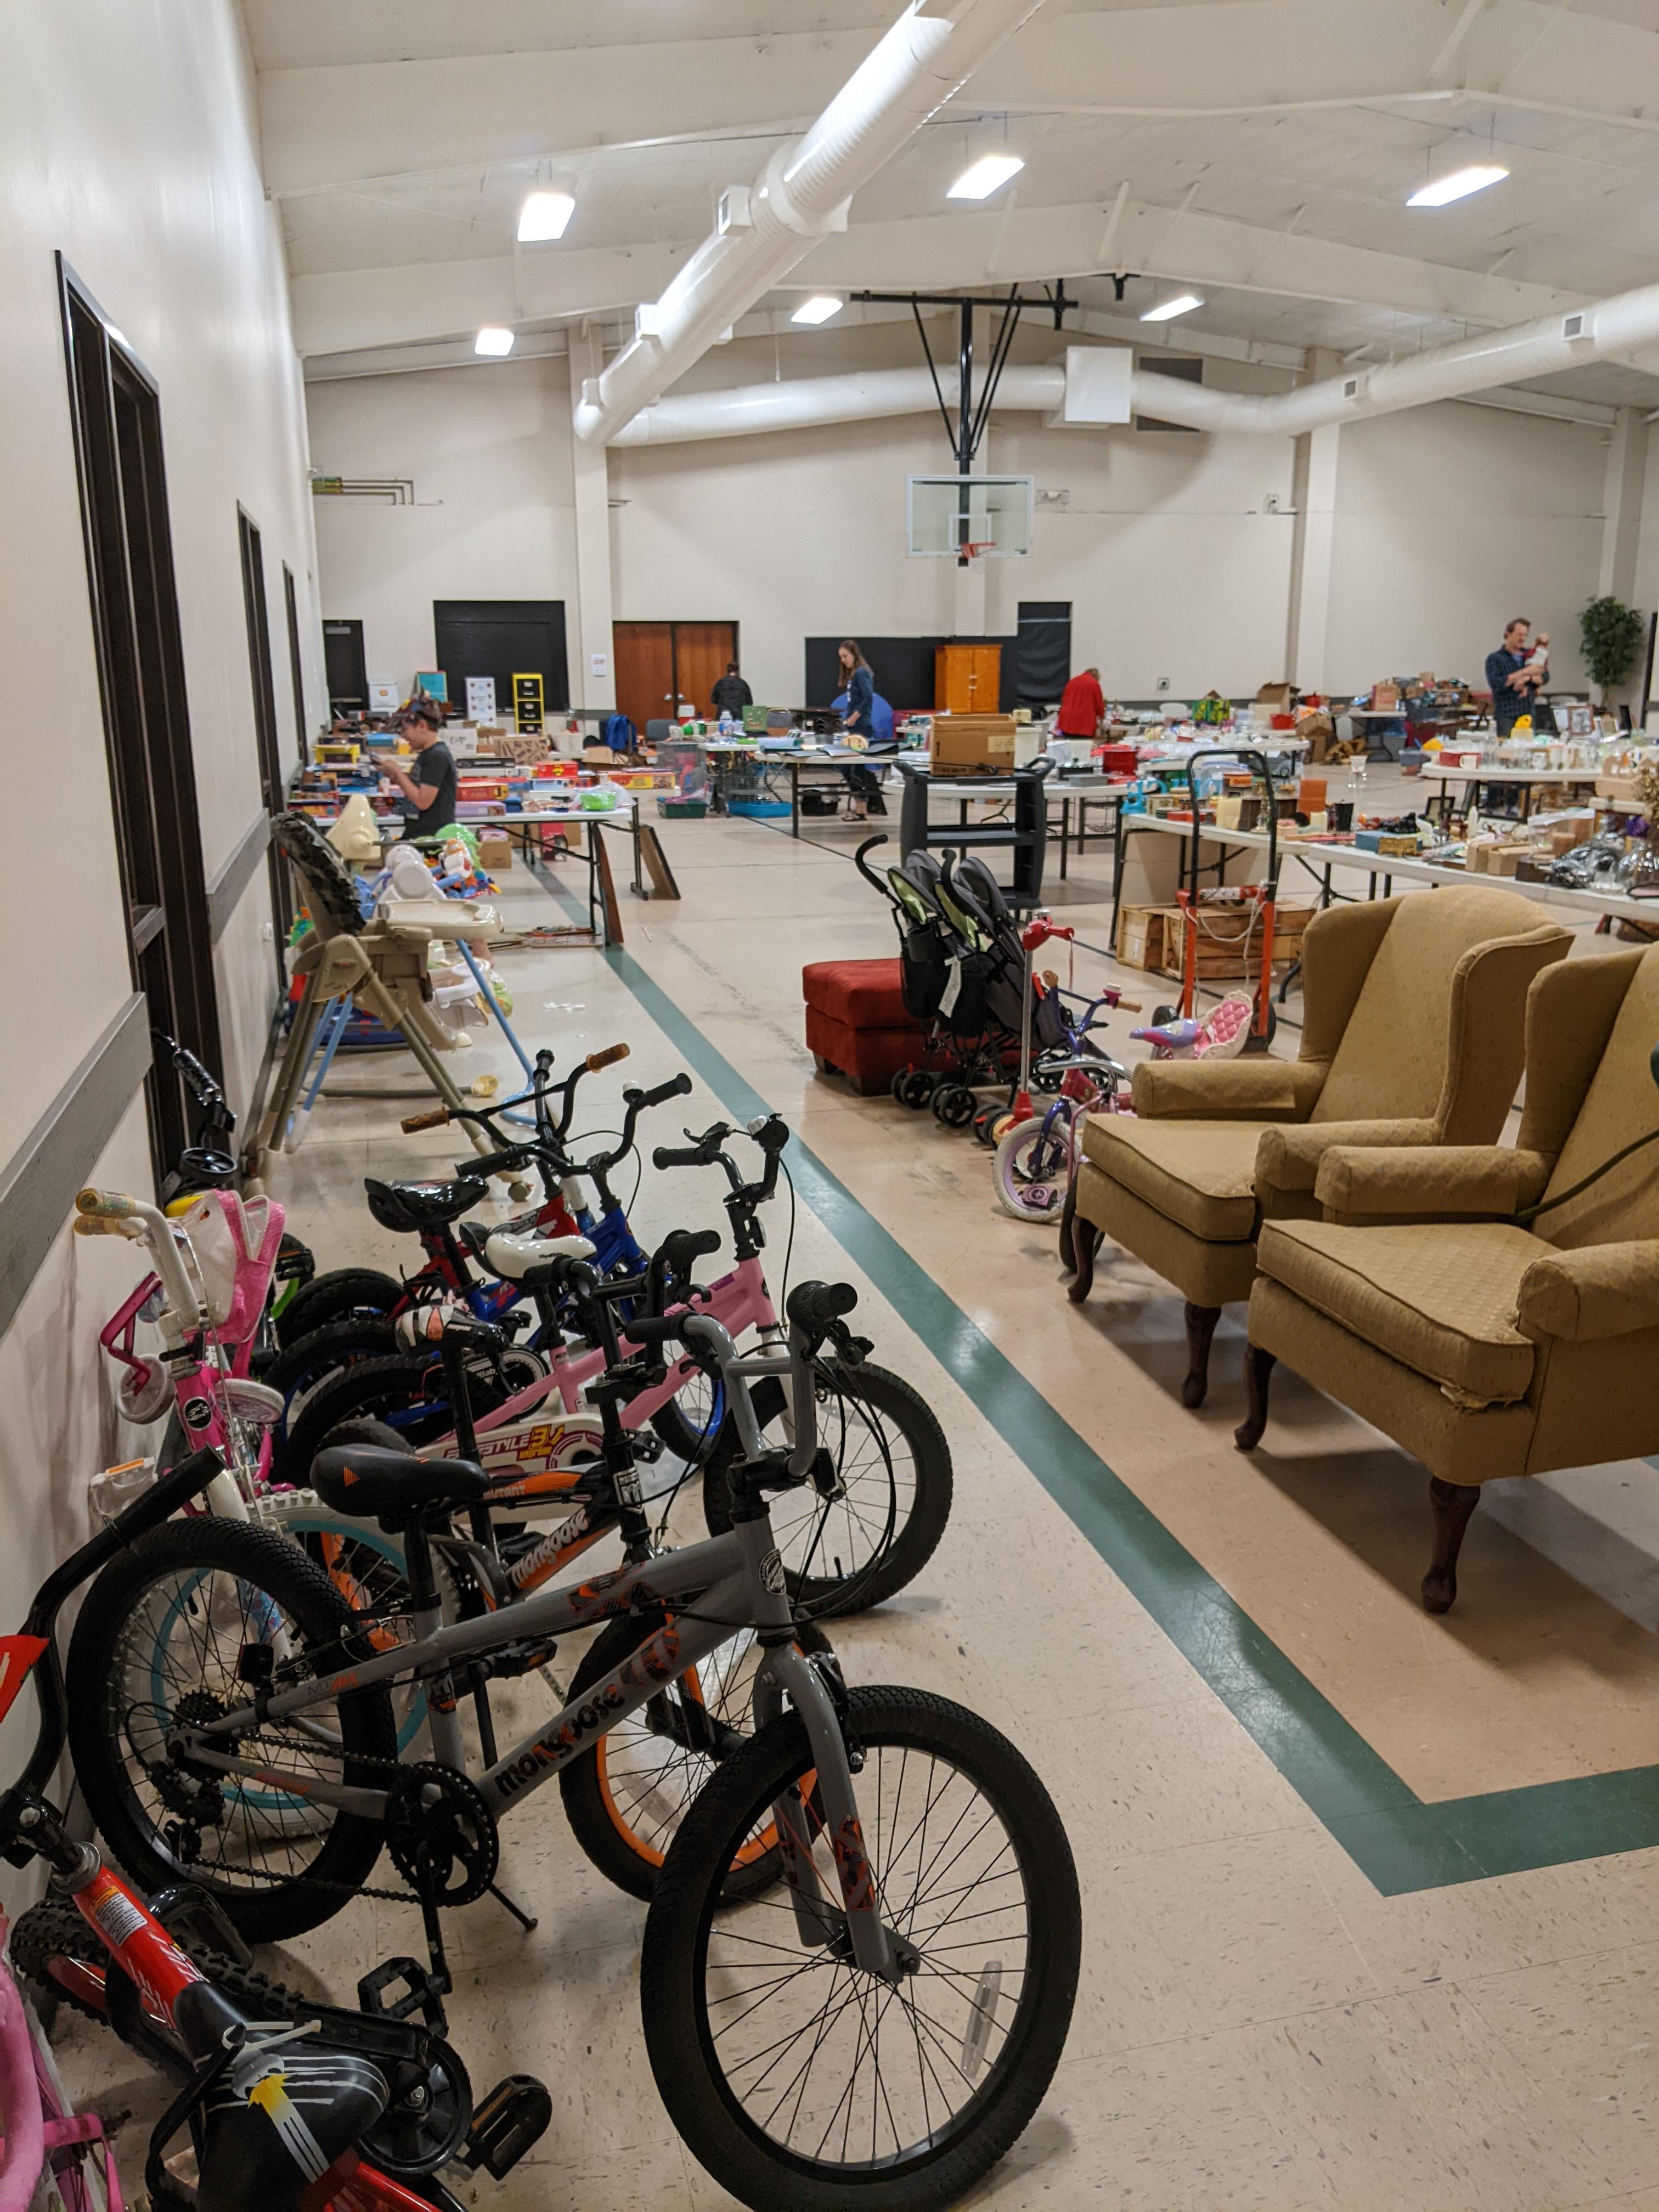 Inside of Westlink Church of Christ community center while being used as a garage sale.